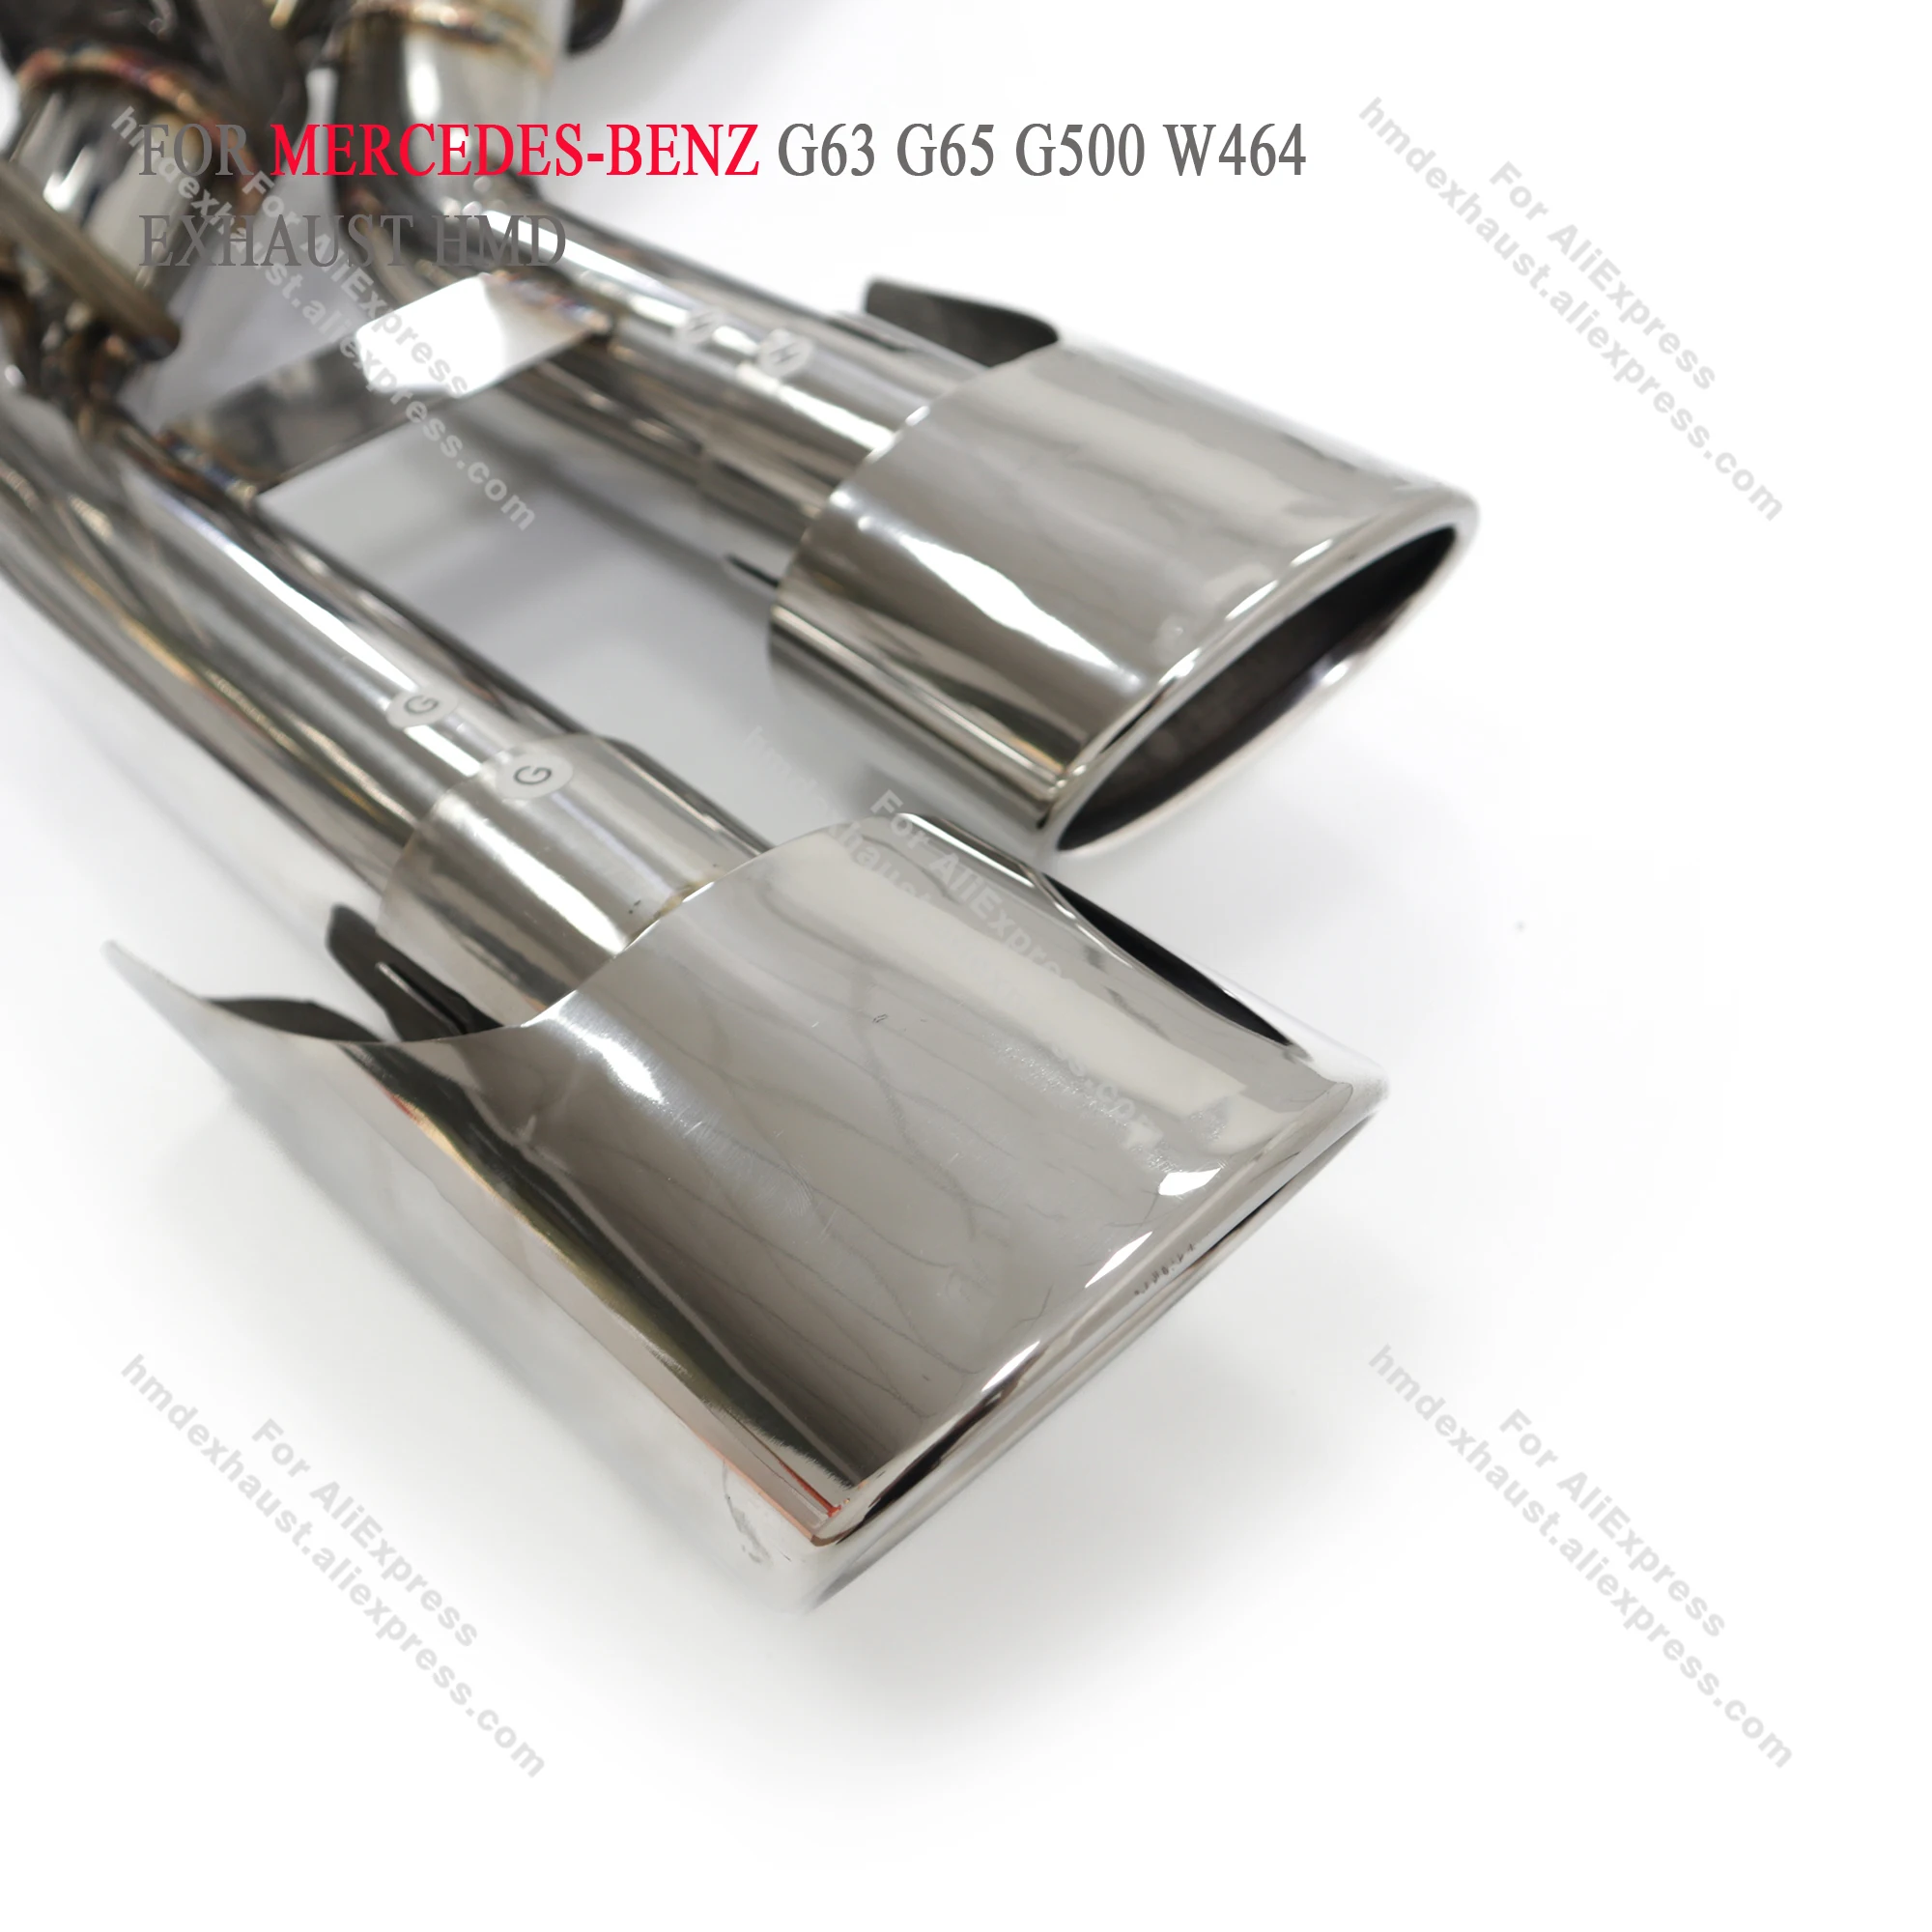 The HMD stainless steel exhaust system Catback is suitable for Mercedes-Benz G500 G63 G65 W463 automotive valve silencer valves